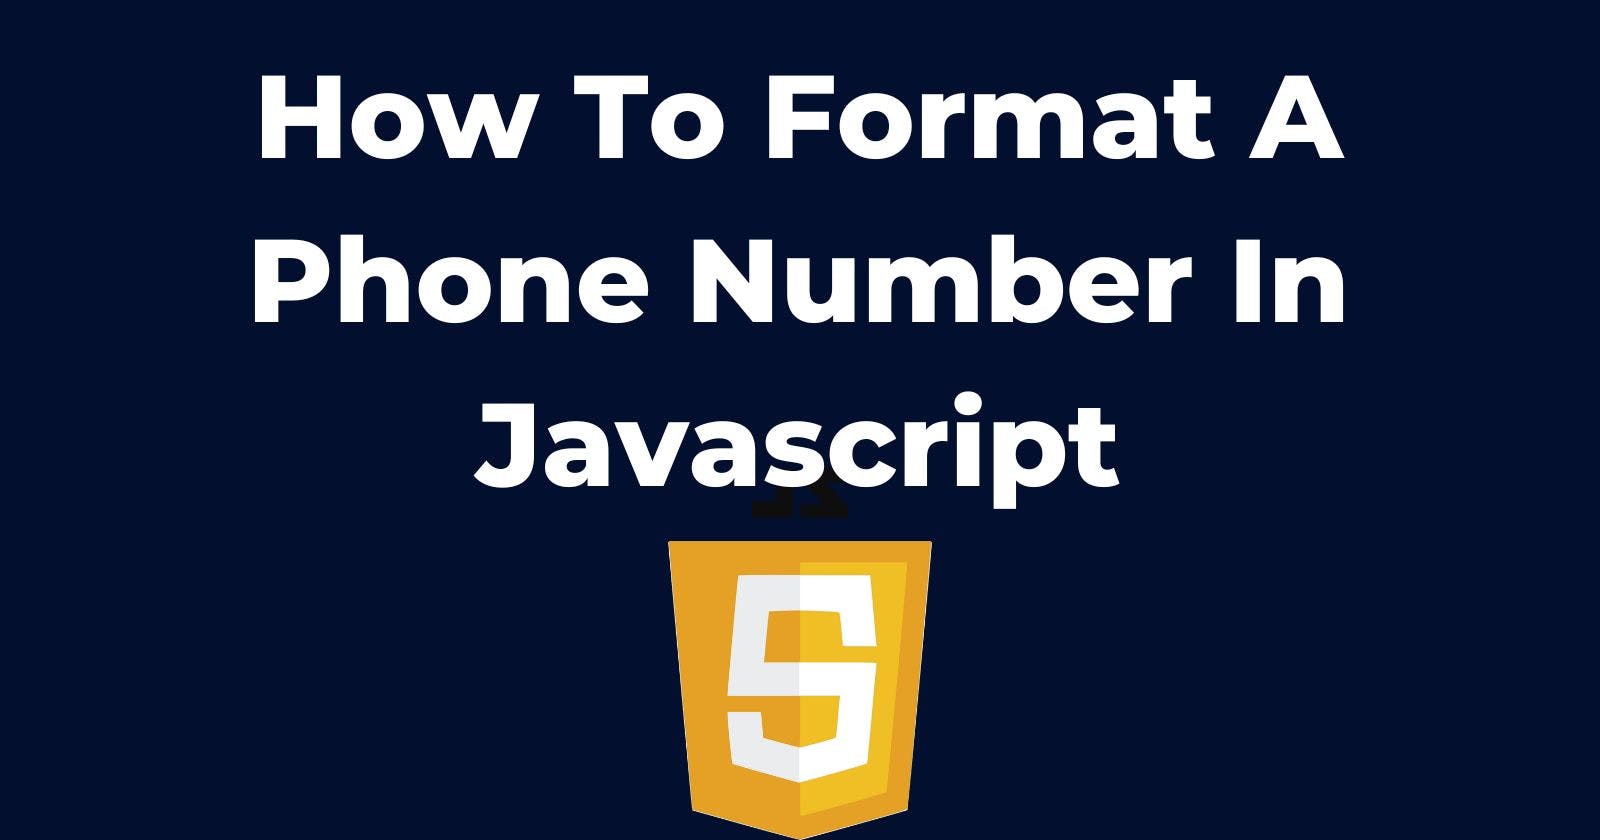 How To Format A Phone Number In Javascript